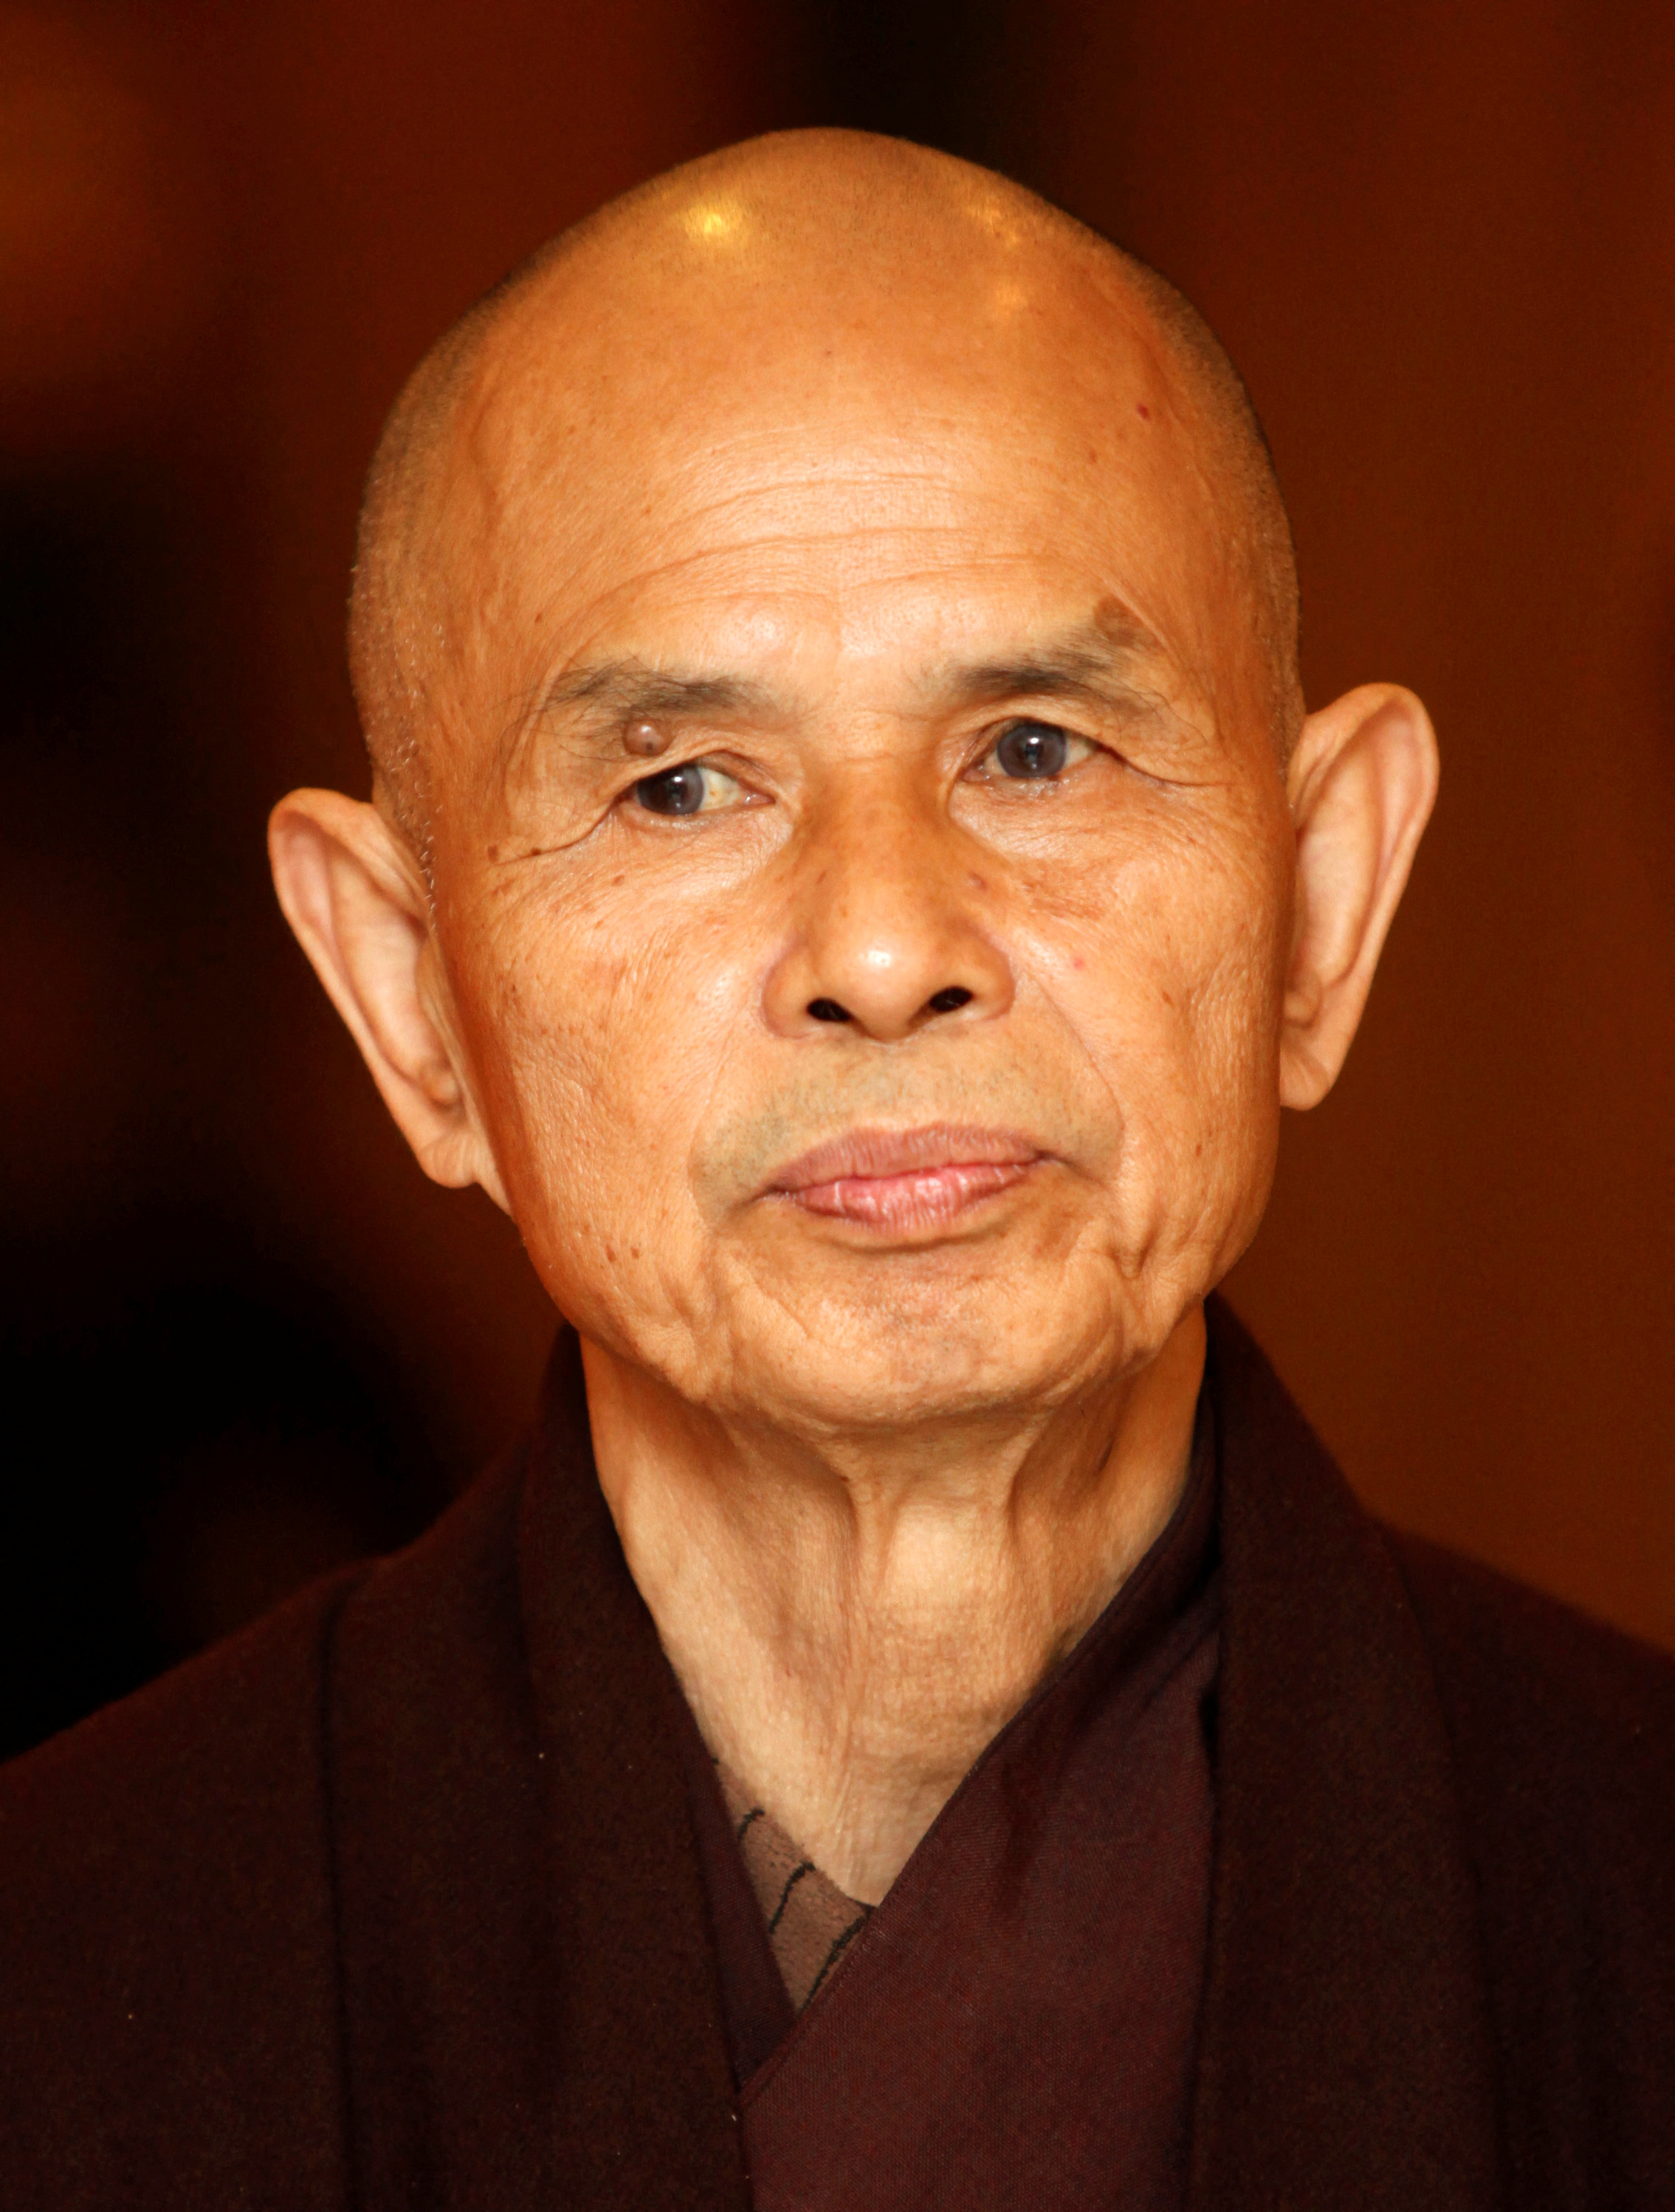 French-based Buddhist zen master Thich Nhat Hanh is seen during his arrival at Suvarnabhumi airport in Bangkok